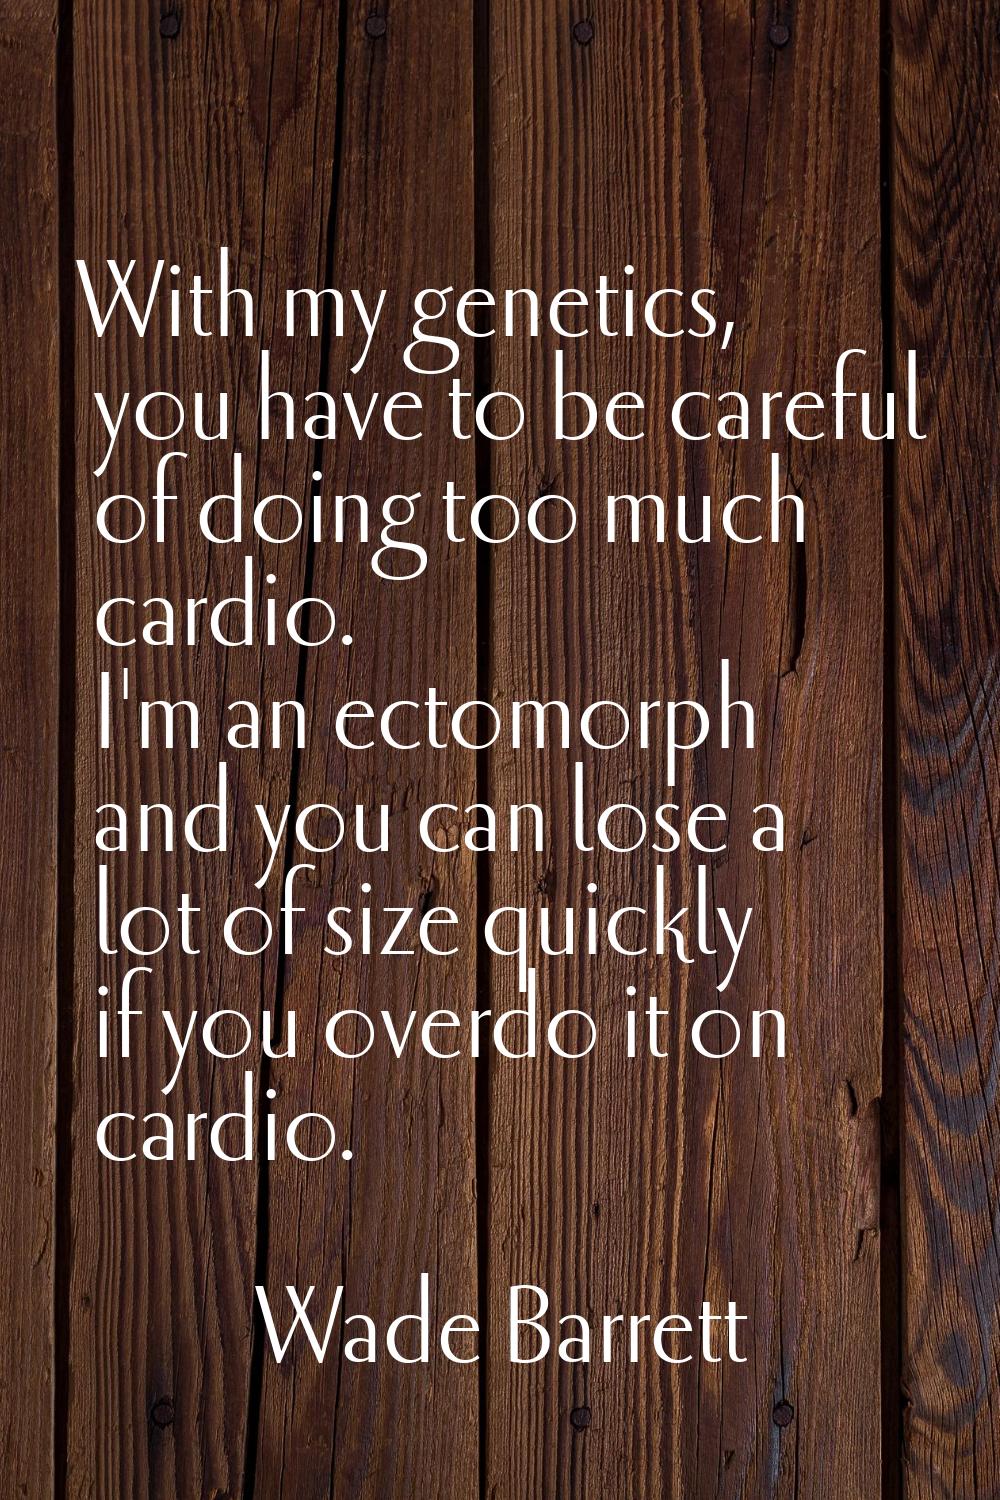 With my genetics, you have to be careful of doing too much cardio. I'm an ectomorph and you can los